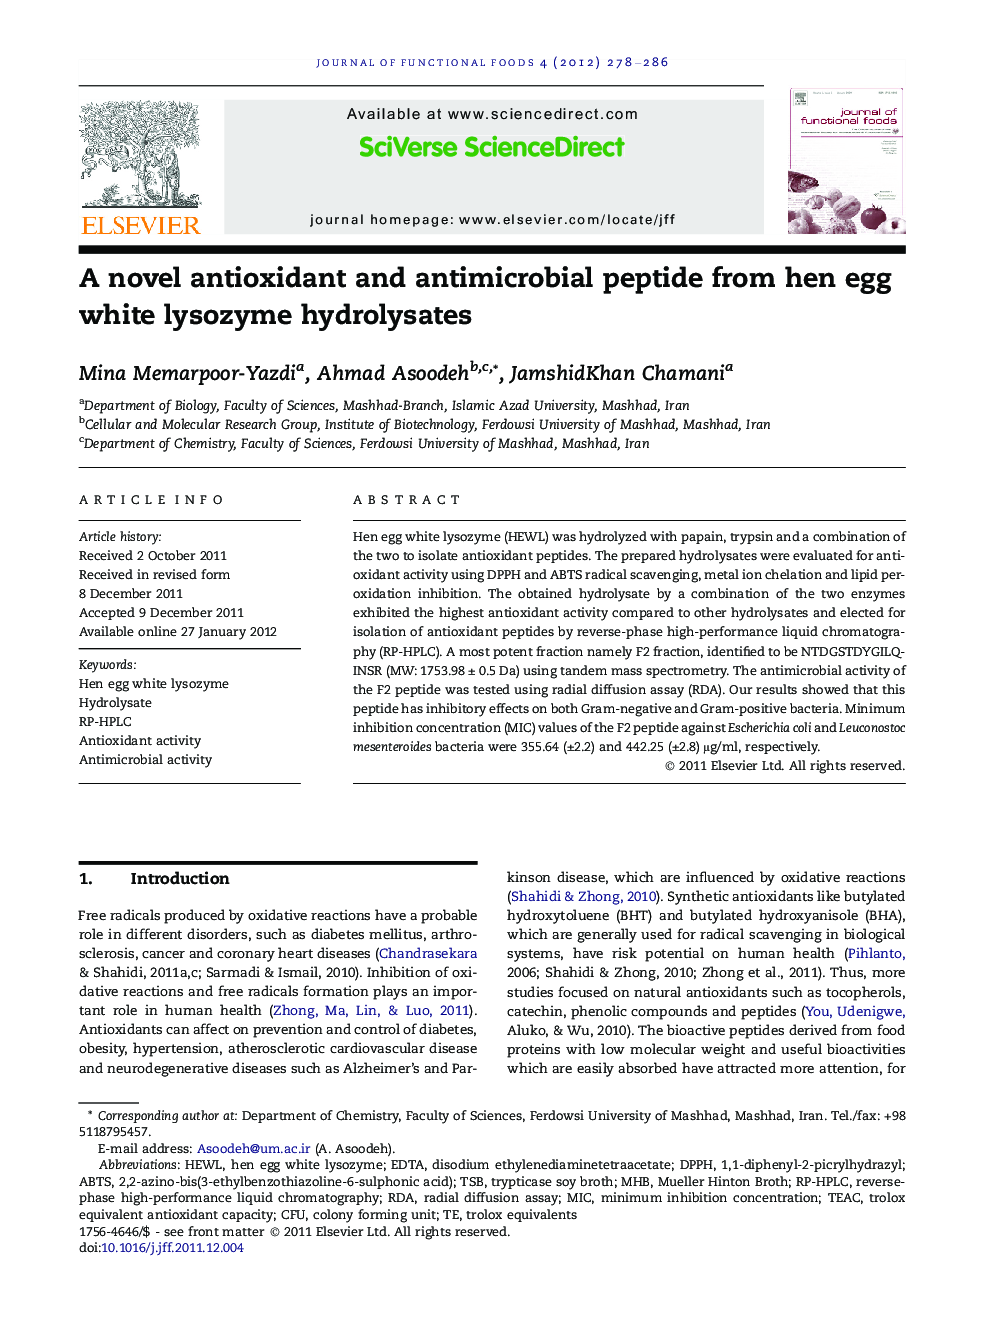 A novel antioxidant and antimicrobial peptide from hen egg white lysozyme hydrolysates